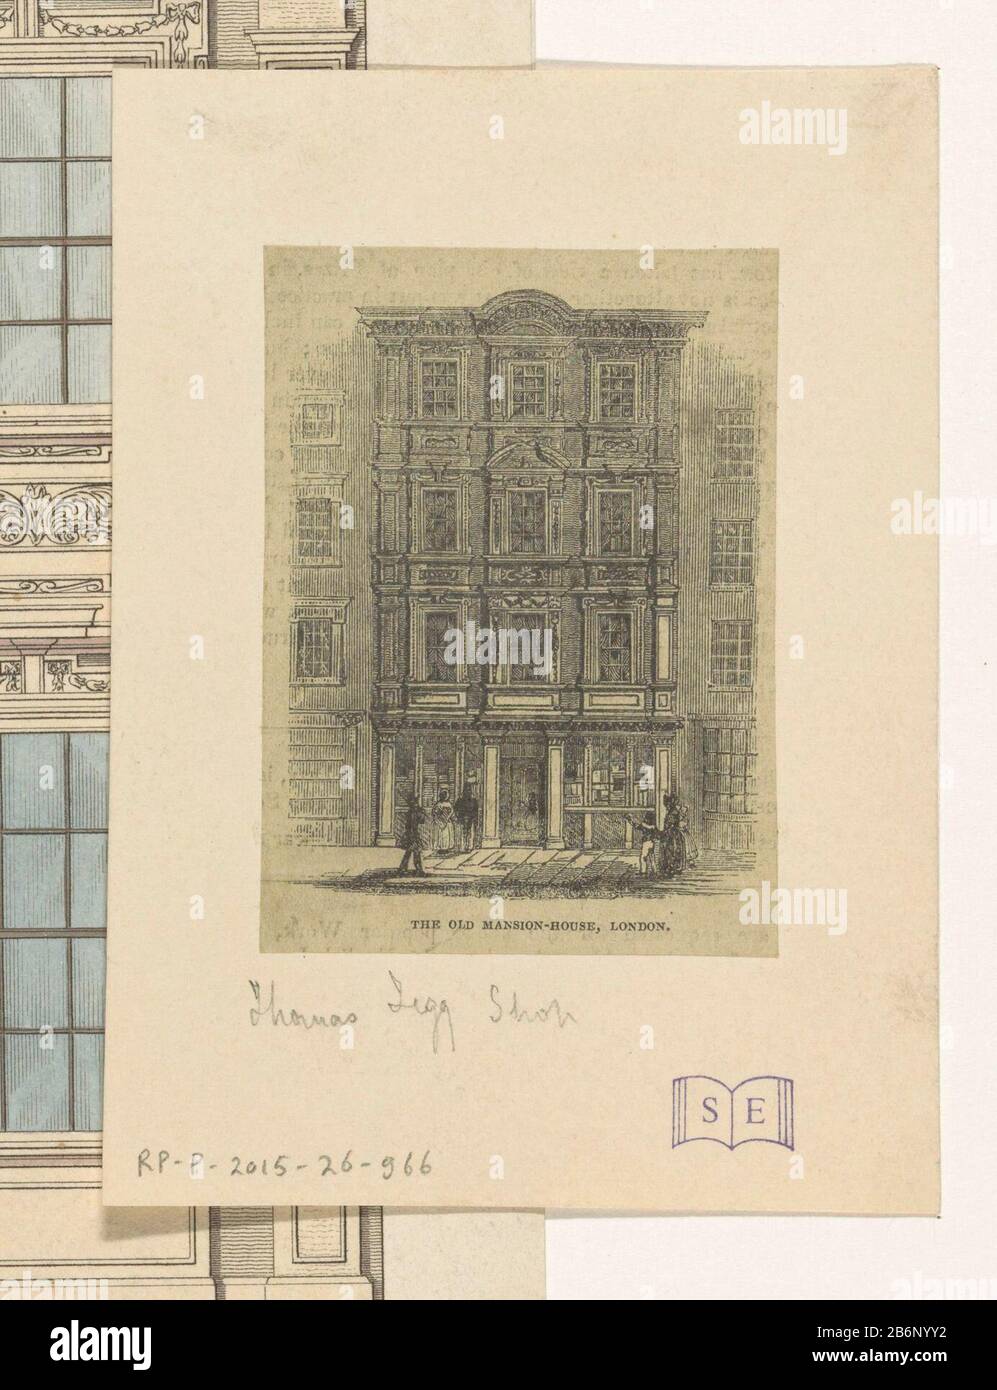 Gevel van de winkel van Thomas Tegg te Londen The Old Mansion-House, London (titel op object) Facade of the shop of Thomas Tegg to LondenThe Old Mansion-House, London (title object) Object type: picture Item number: RP-P-2015-26-966 Inscriptions / Brands: collector's mark, verso opzetvel, stamped : Lugt 2228 collector's mark , recto opzetvel, stamped: Lugt 4779 Manufacturer : printmaker: anonymous date: 1824 - 1846 Physical features: wood engra material: paper Technique: wood engra dimensions: sheet: h 74 mm × W 54 mmToelichting Stock Photo